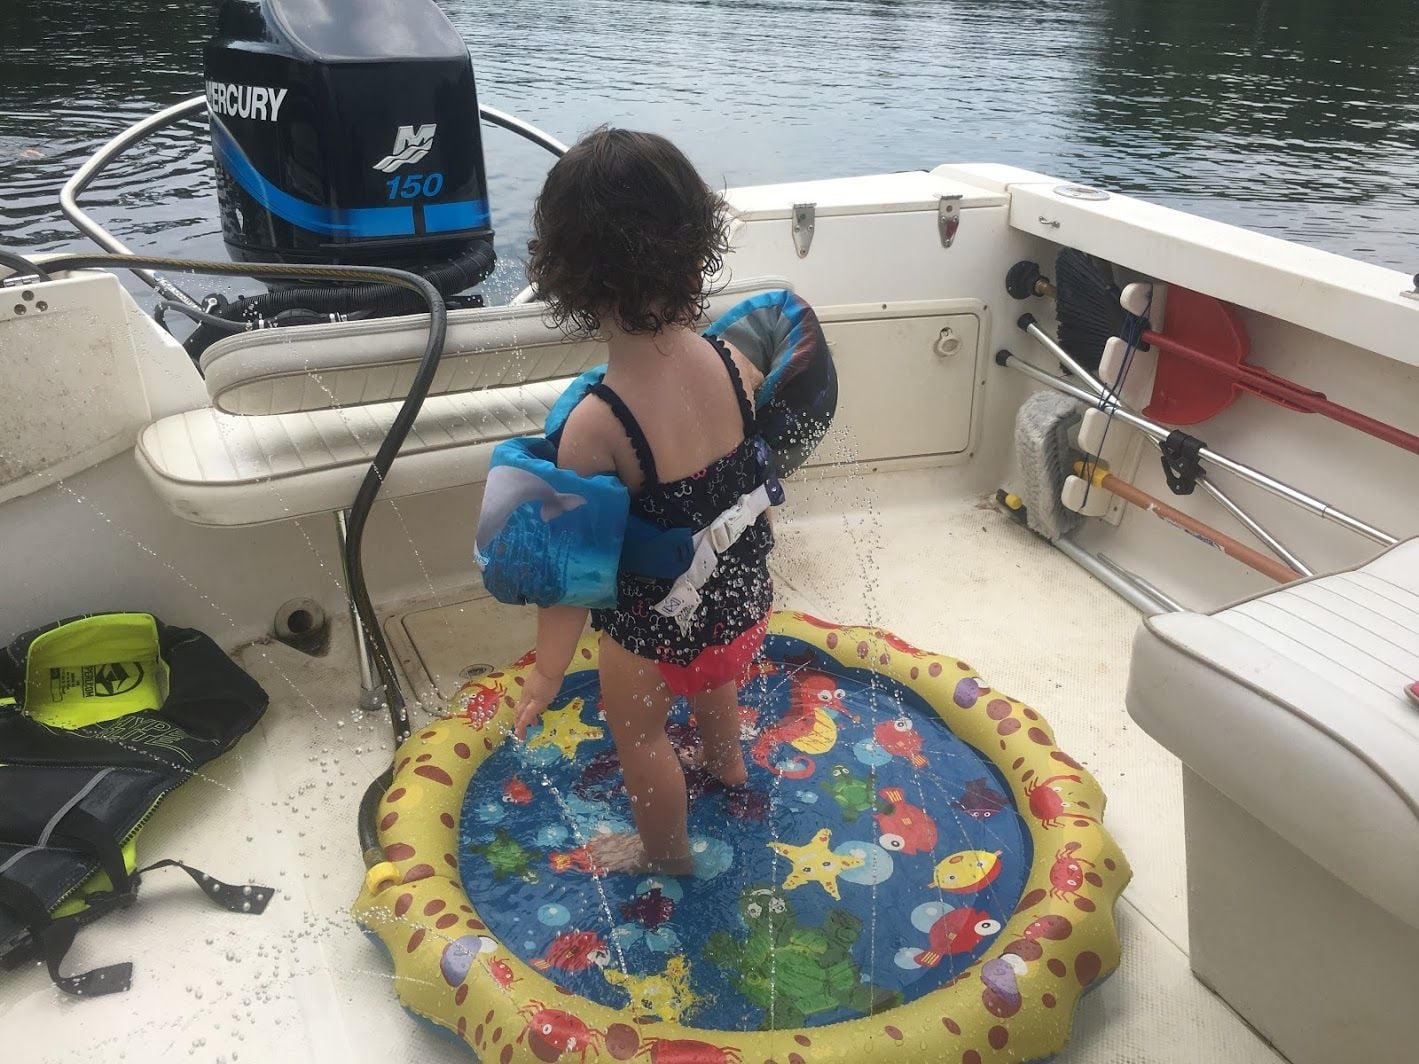 Infant life jacket recommendations - The Hull Truth - Boating and Fishing  Forum